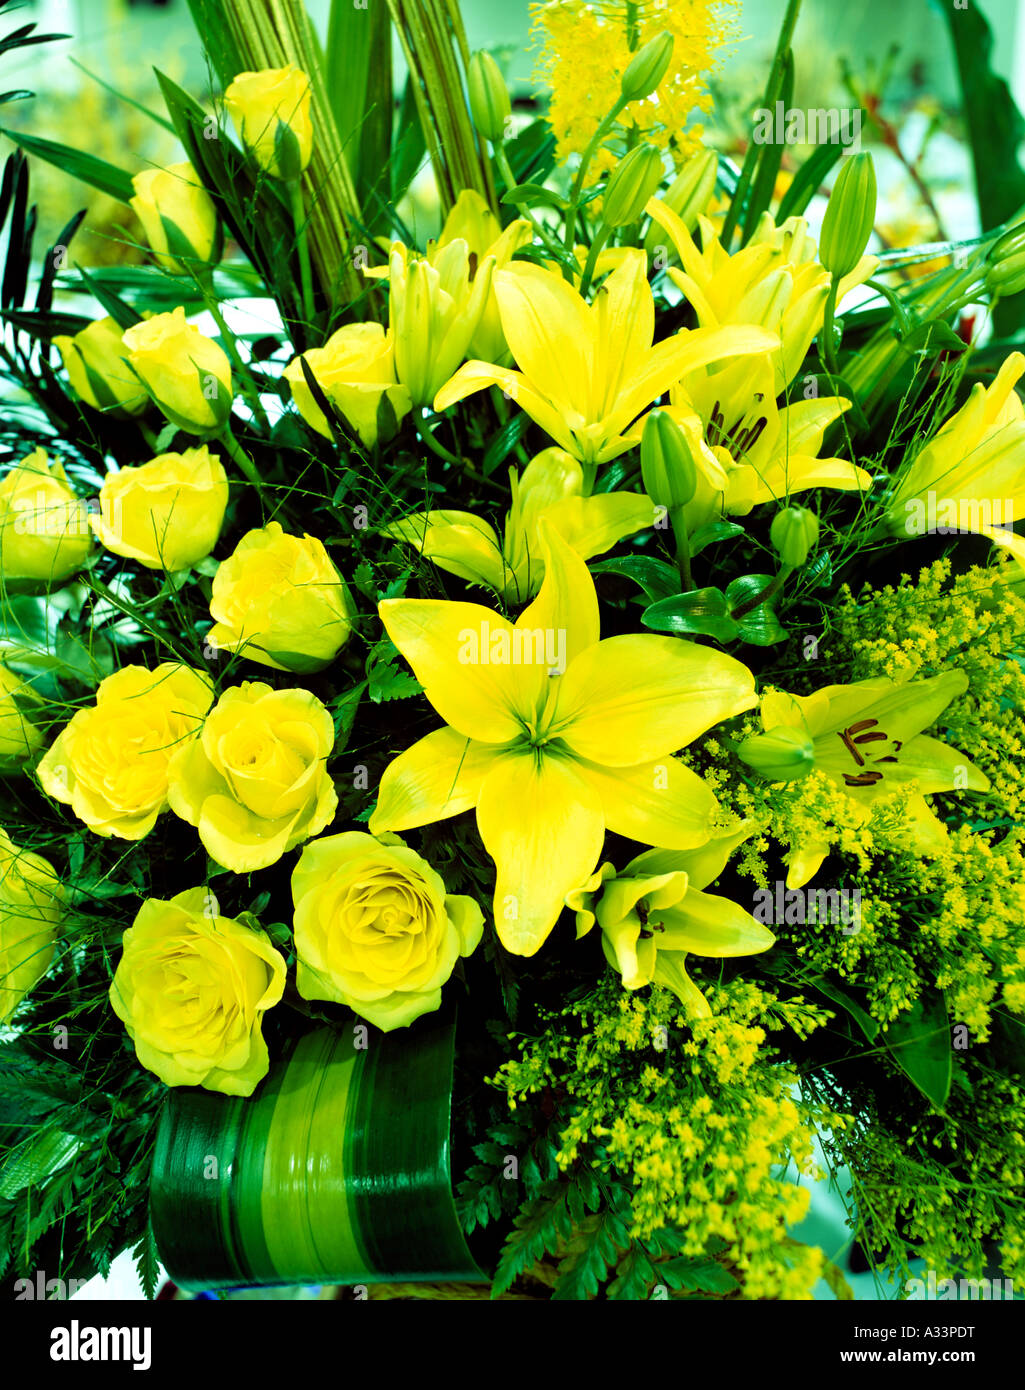 EXHIBITION OF FLOWERS AT INTERNATIONAL CONVENTION CENTRE IN DOHA QATAR Stock Photo